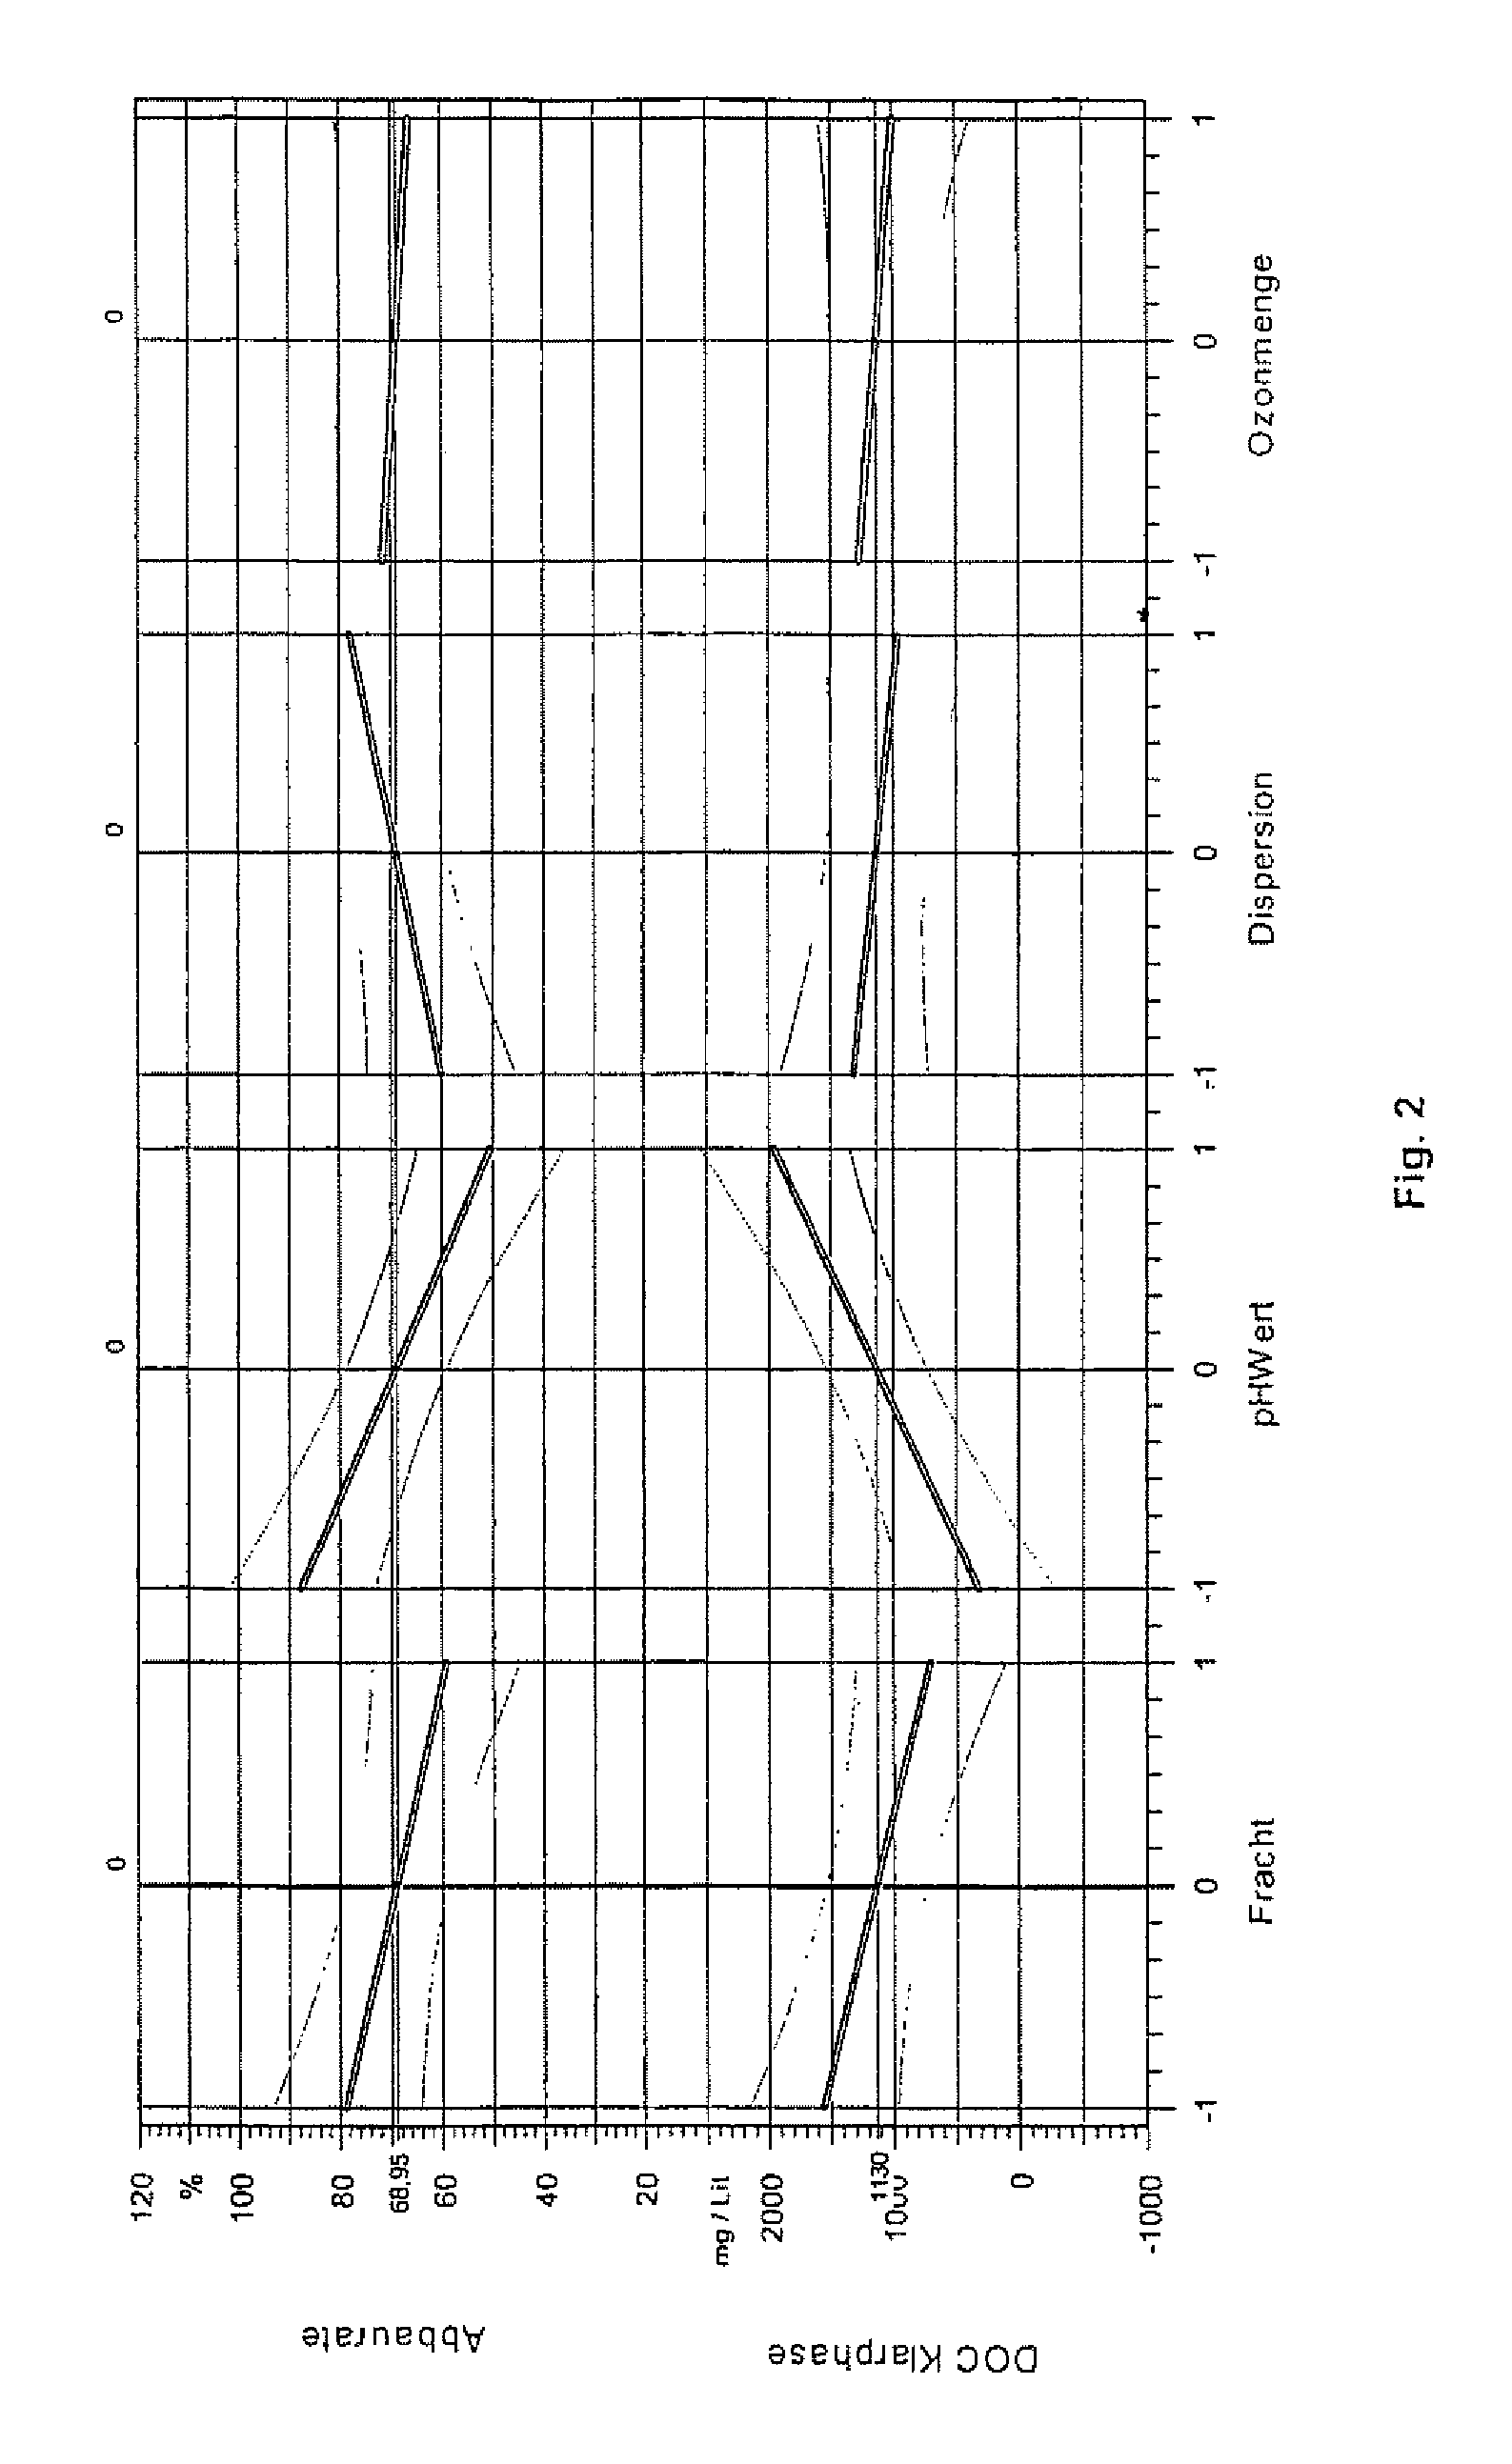 Method and apparatus for continuously controlling denitrification in variable nitrogen loads in wastewater